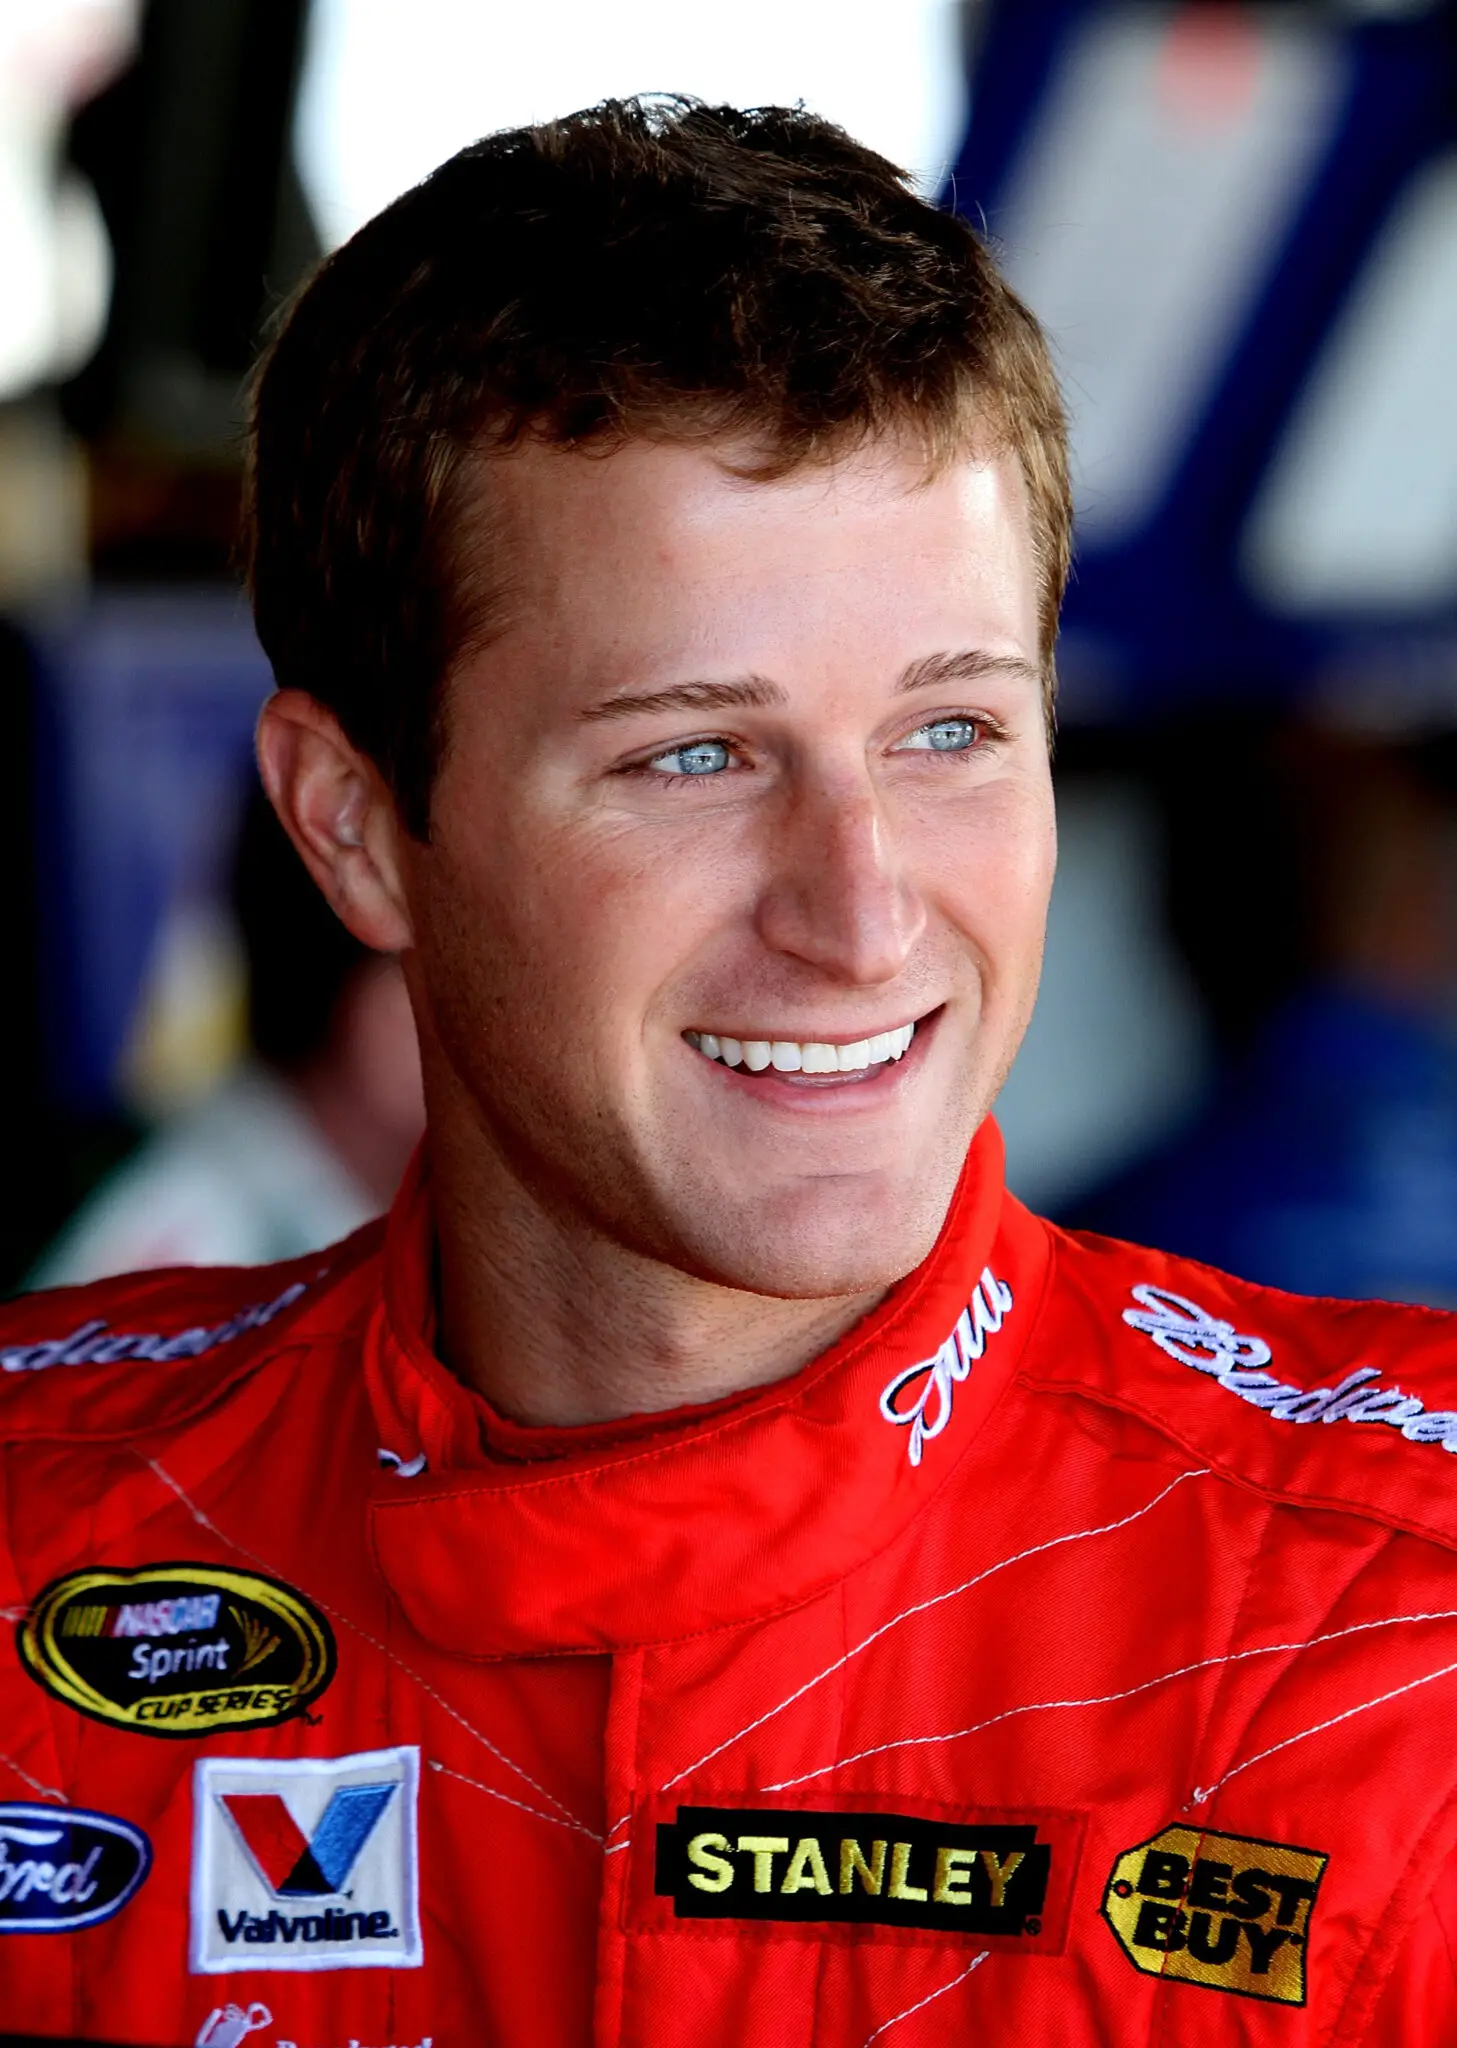 Kasey Kahne is a well-known American dirt track racing driver and former pr...